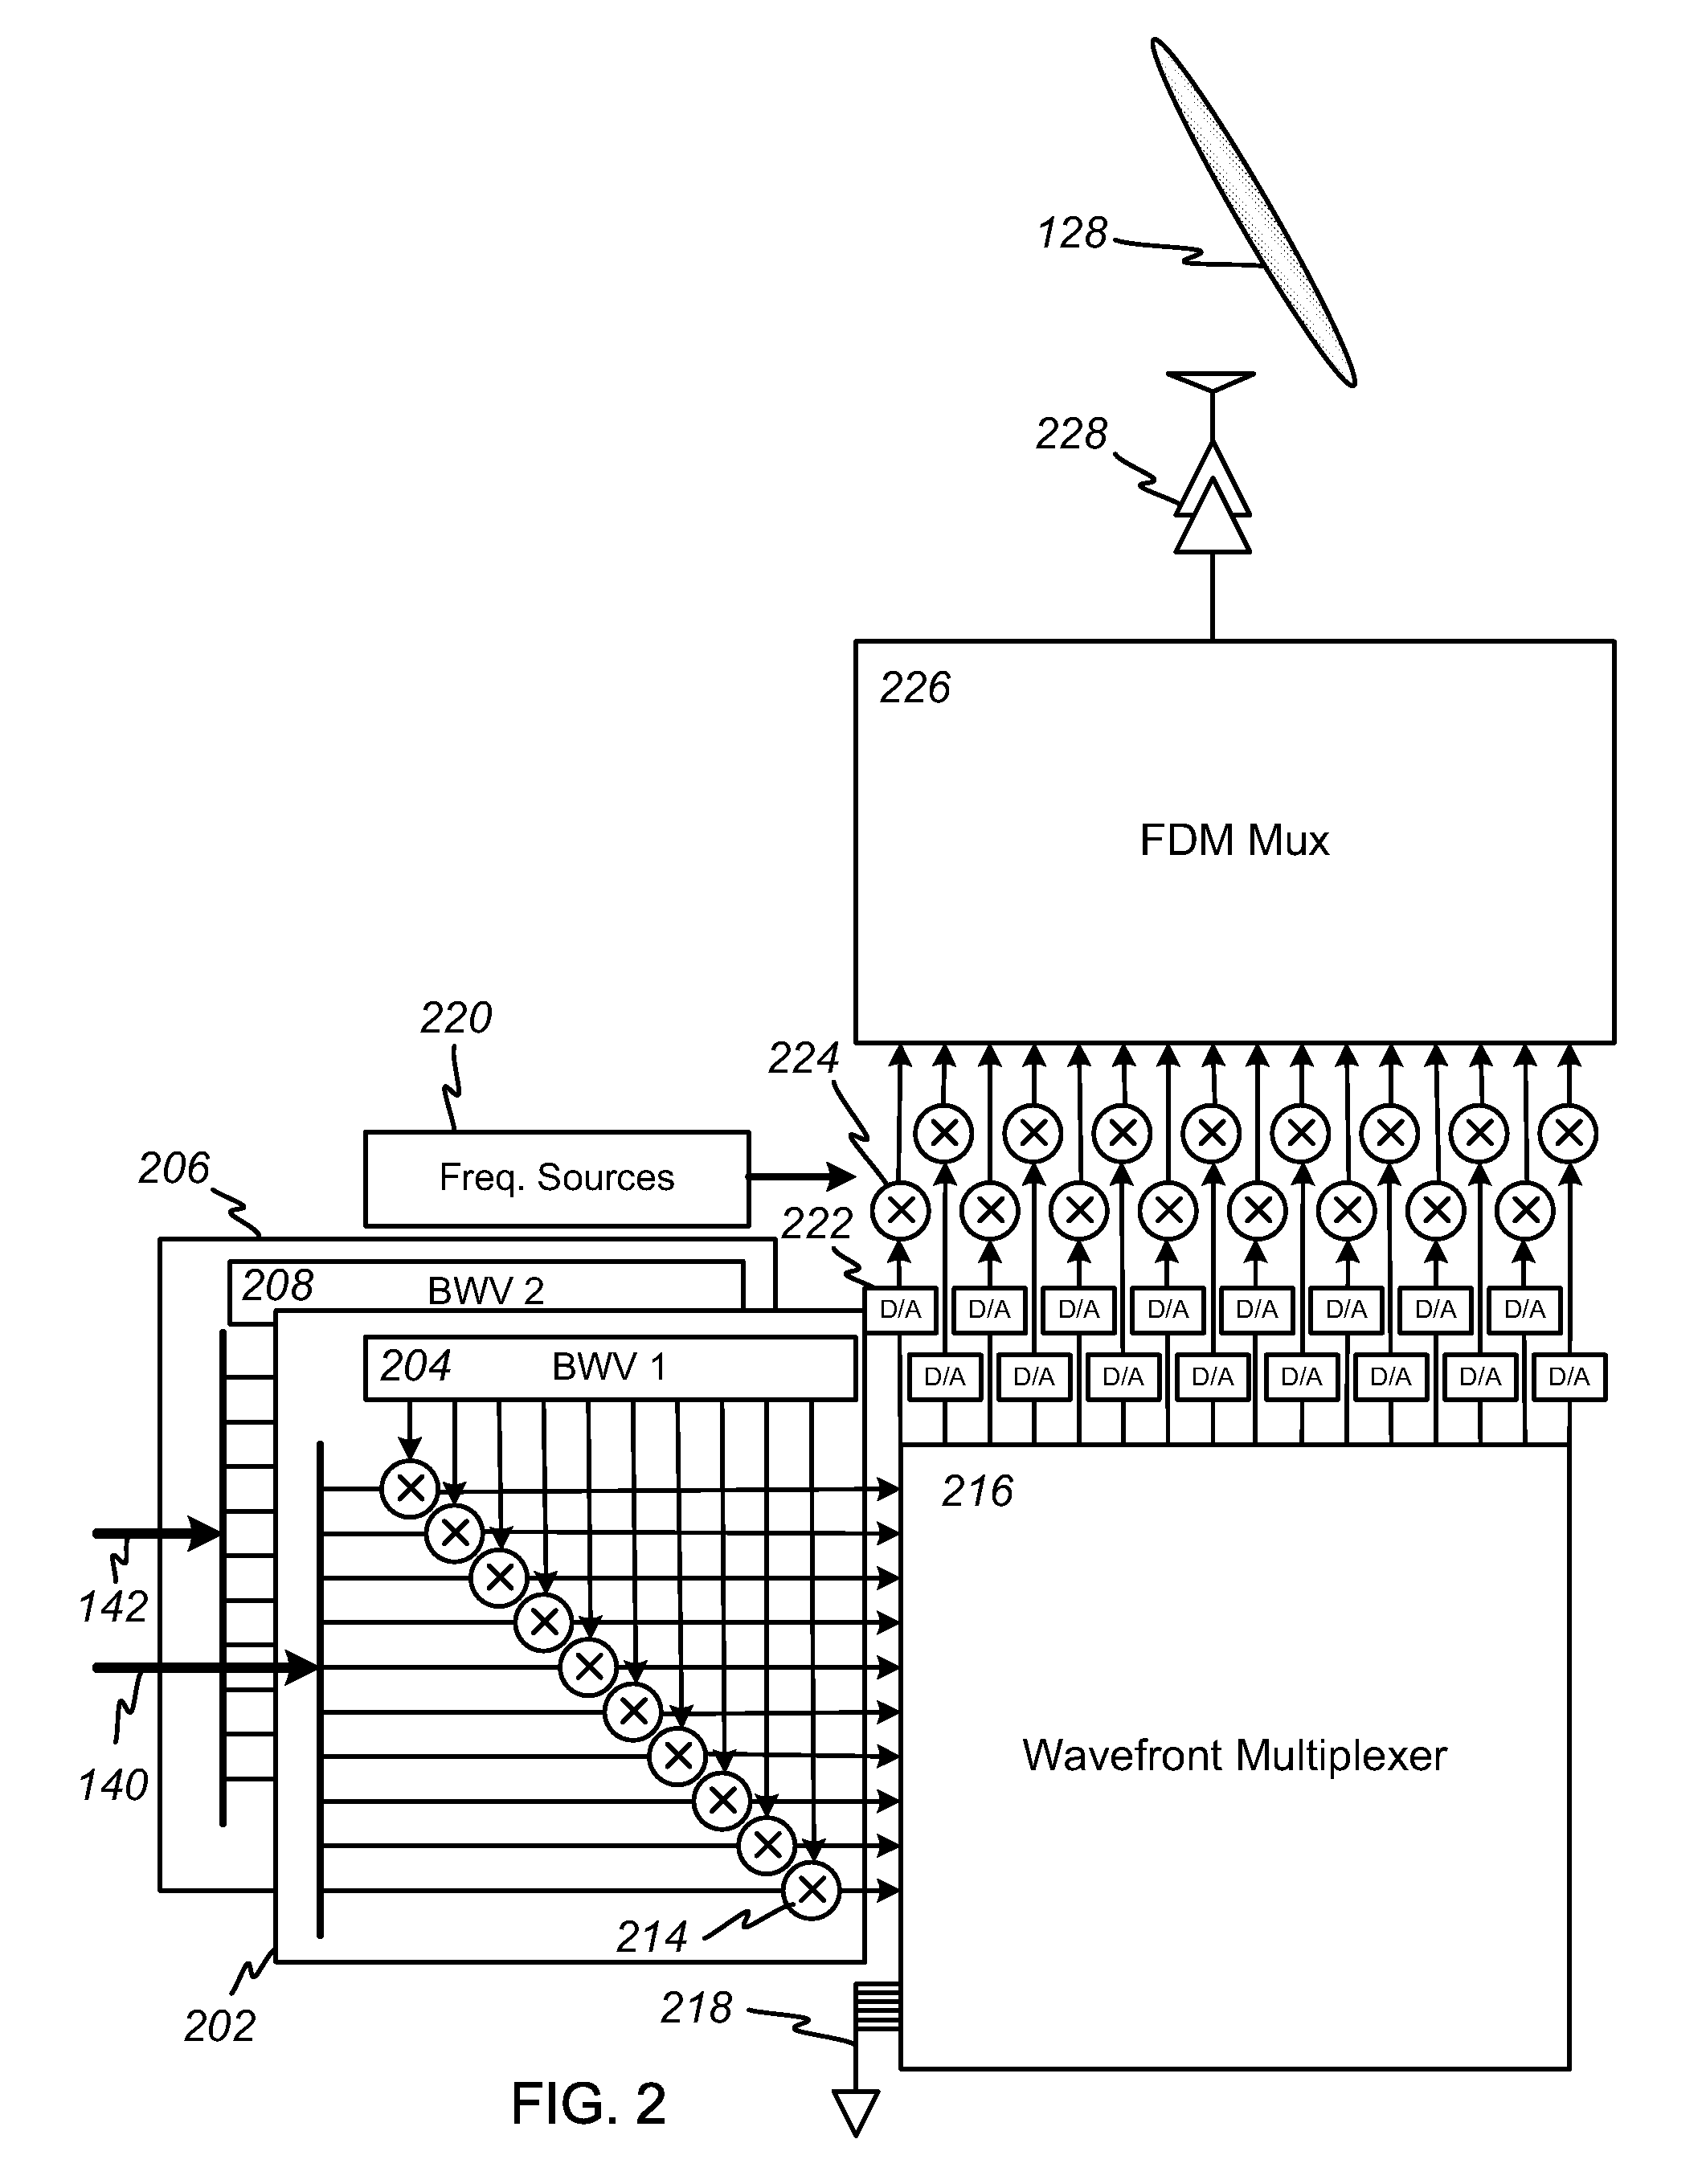 Apparatus and method for remote beam forming for satellite broadcasting systems